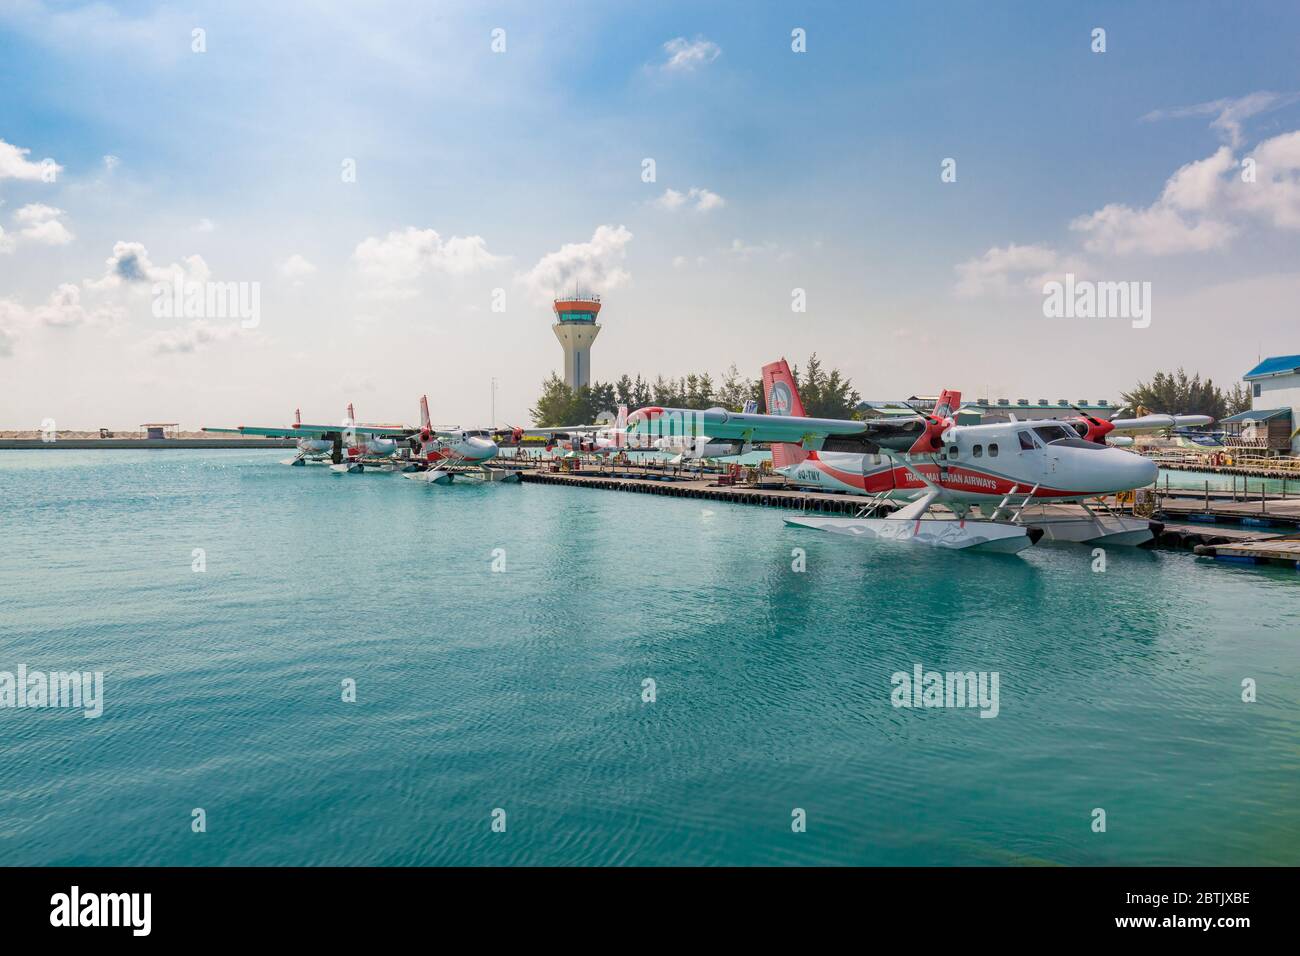 Male, Maldives – May 10, 2019: TMA - Trans Maldivian Airways Twin Otter seaplanes at Male airport (MLE) in the Maldives. Seaplane parking in Male Stock Photo